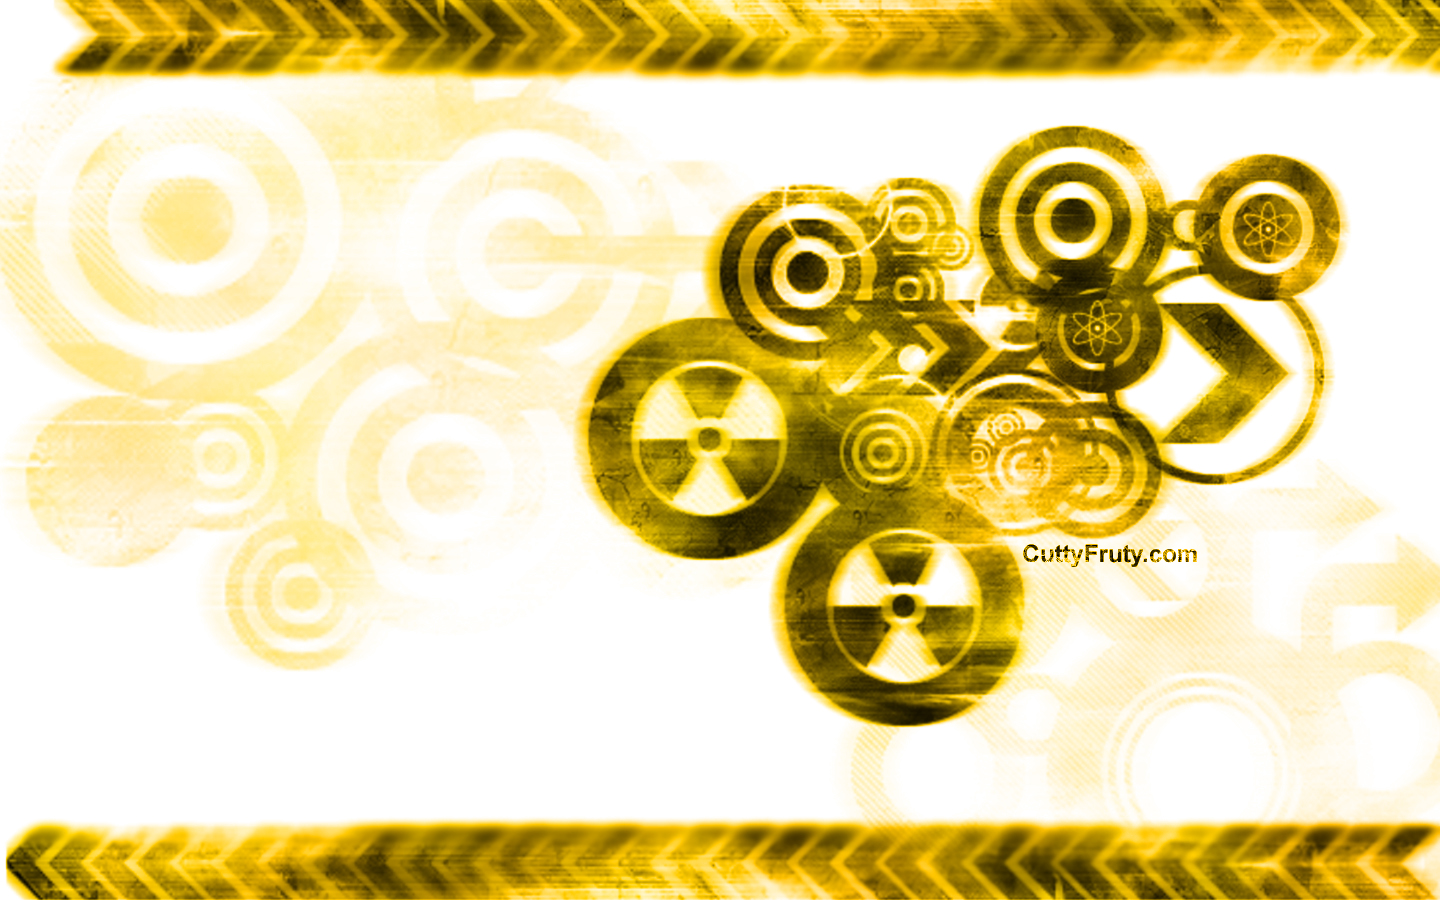 Size: 1440X900 Done in 2007. Radioactive.